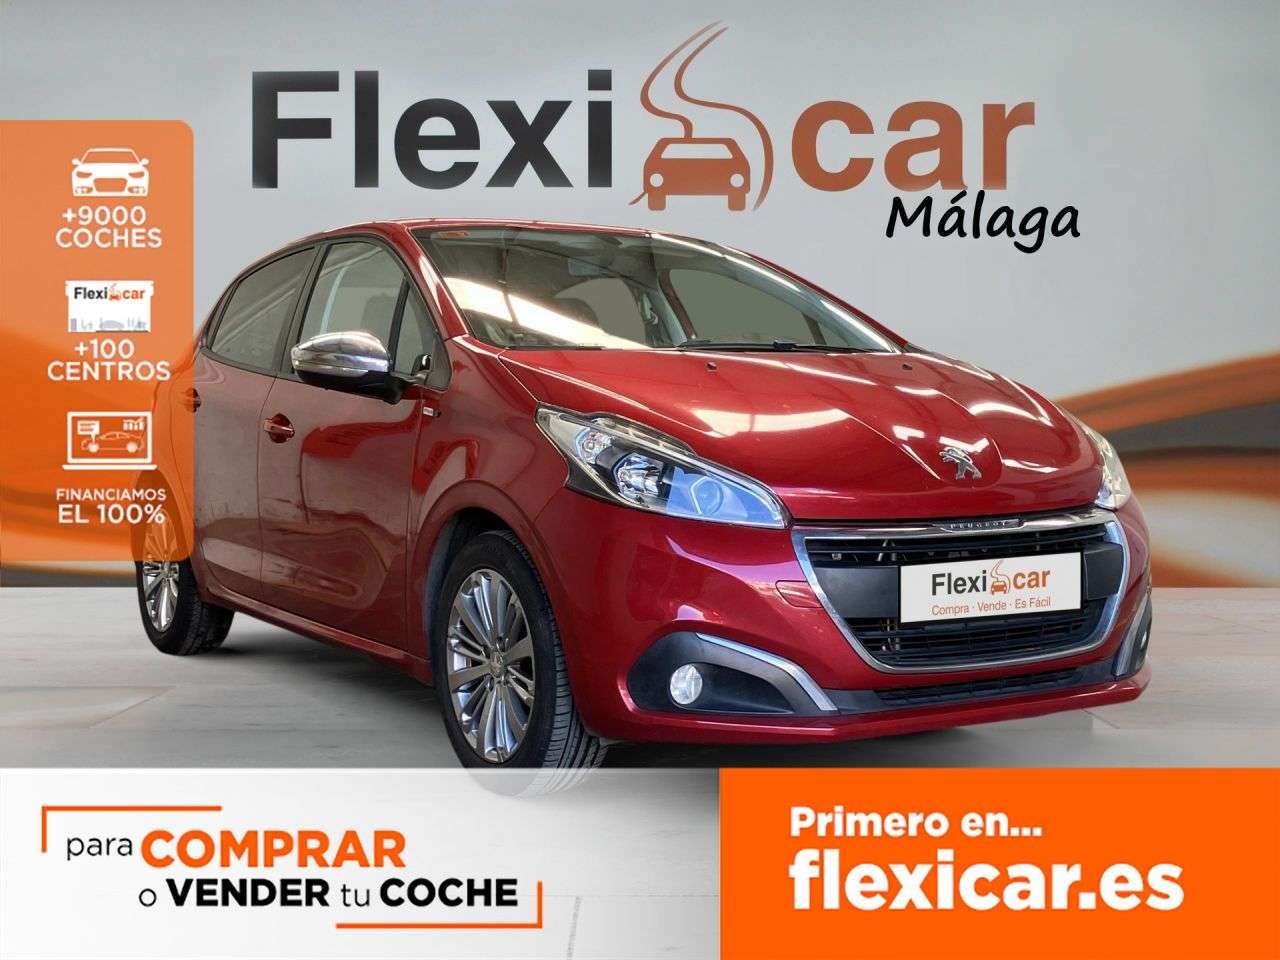 Peugeot 208 Compact in Red used in alcalá de guadaira for € 9,990.-